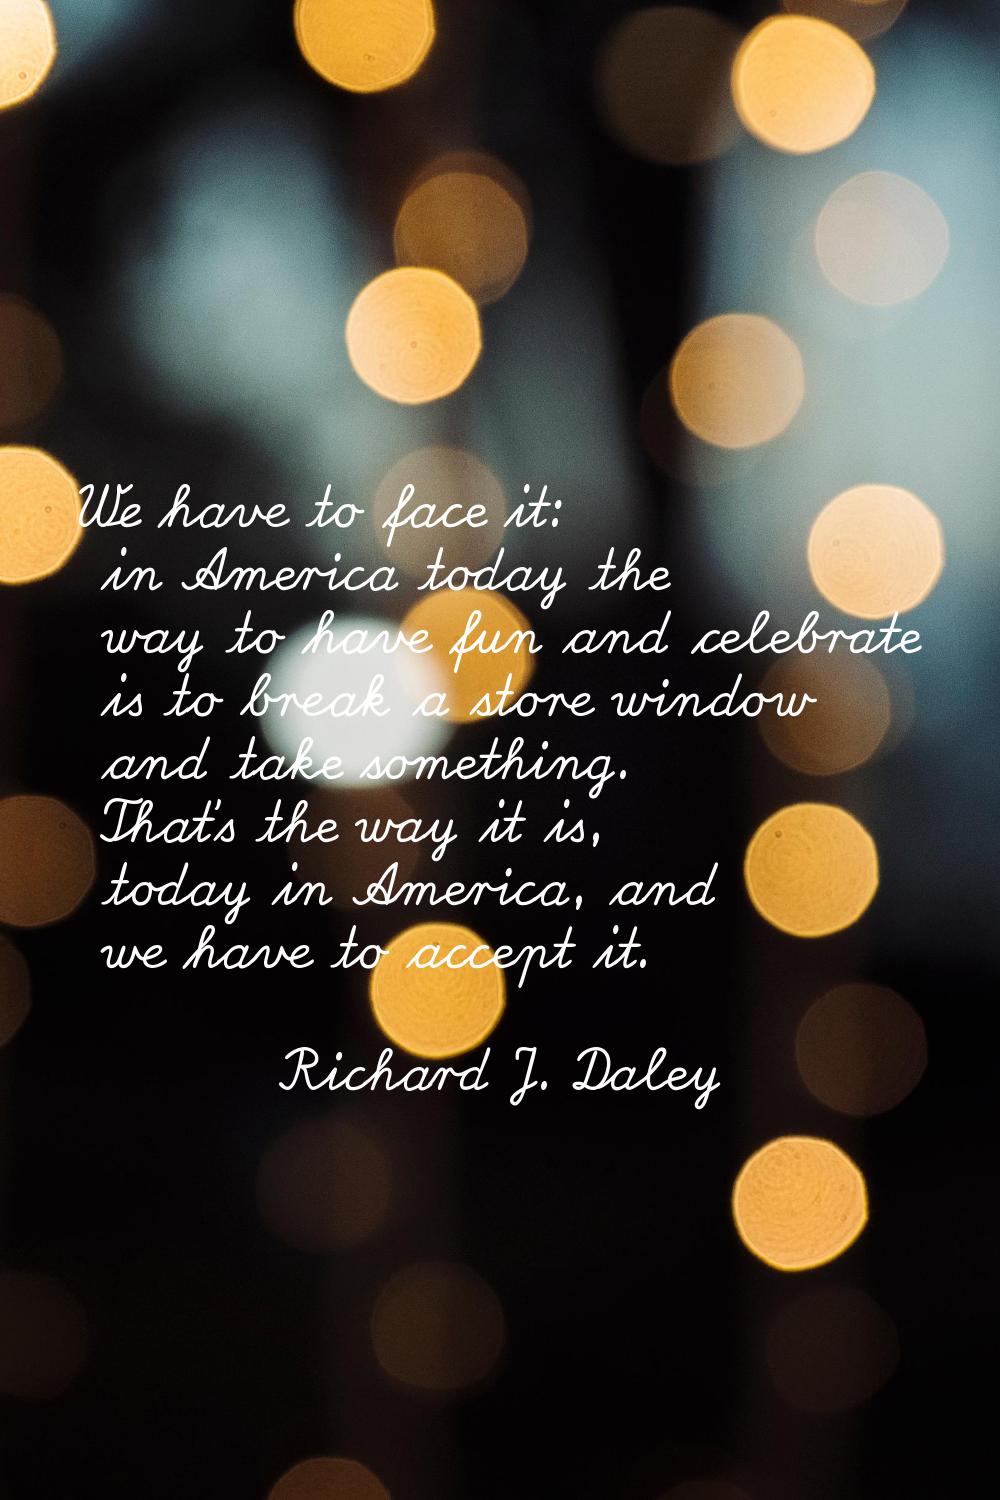 We have to face it: in America today the way to have fun and celebrate is to break a store window a